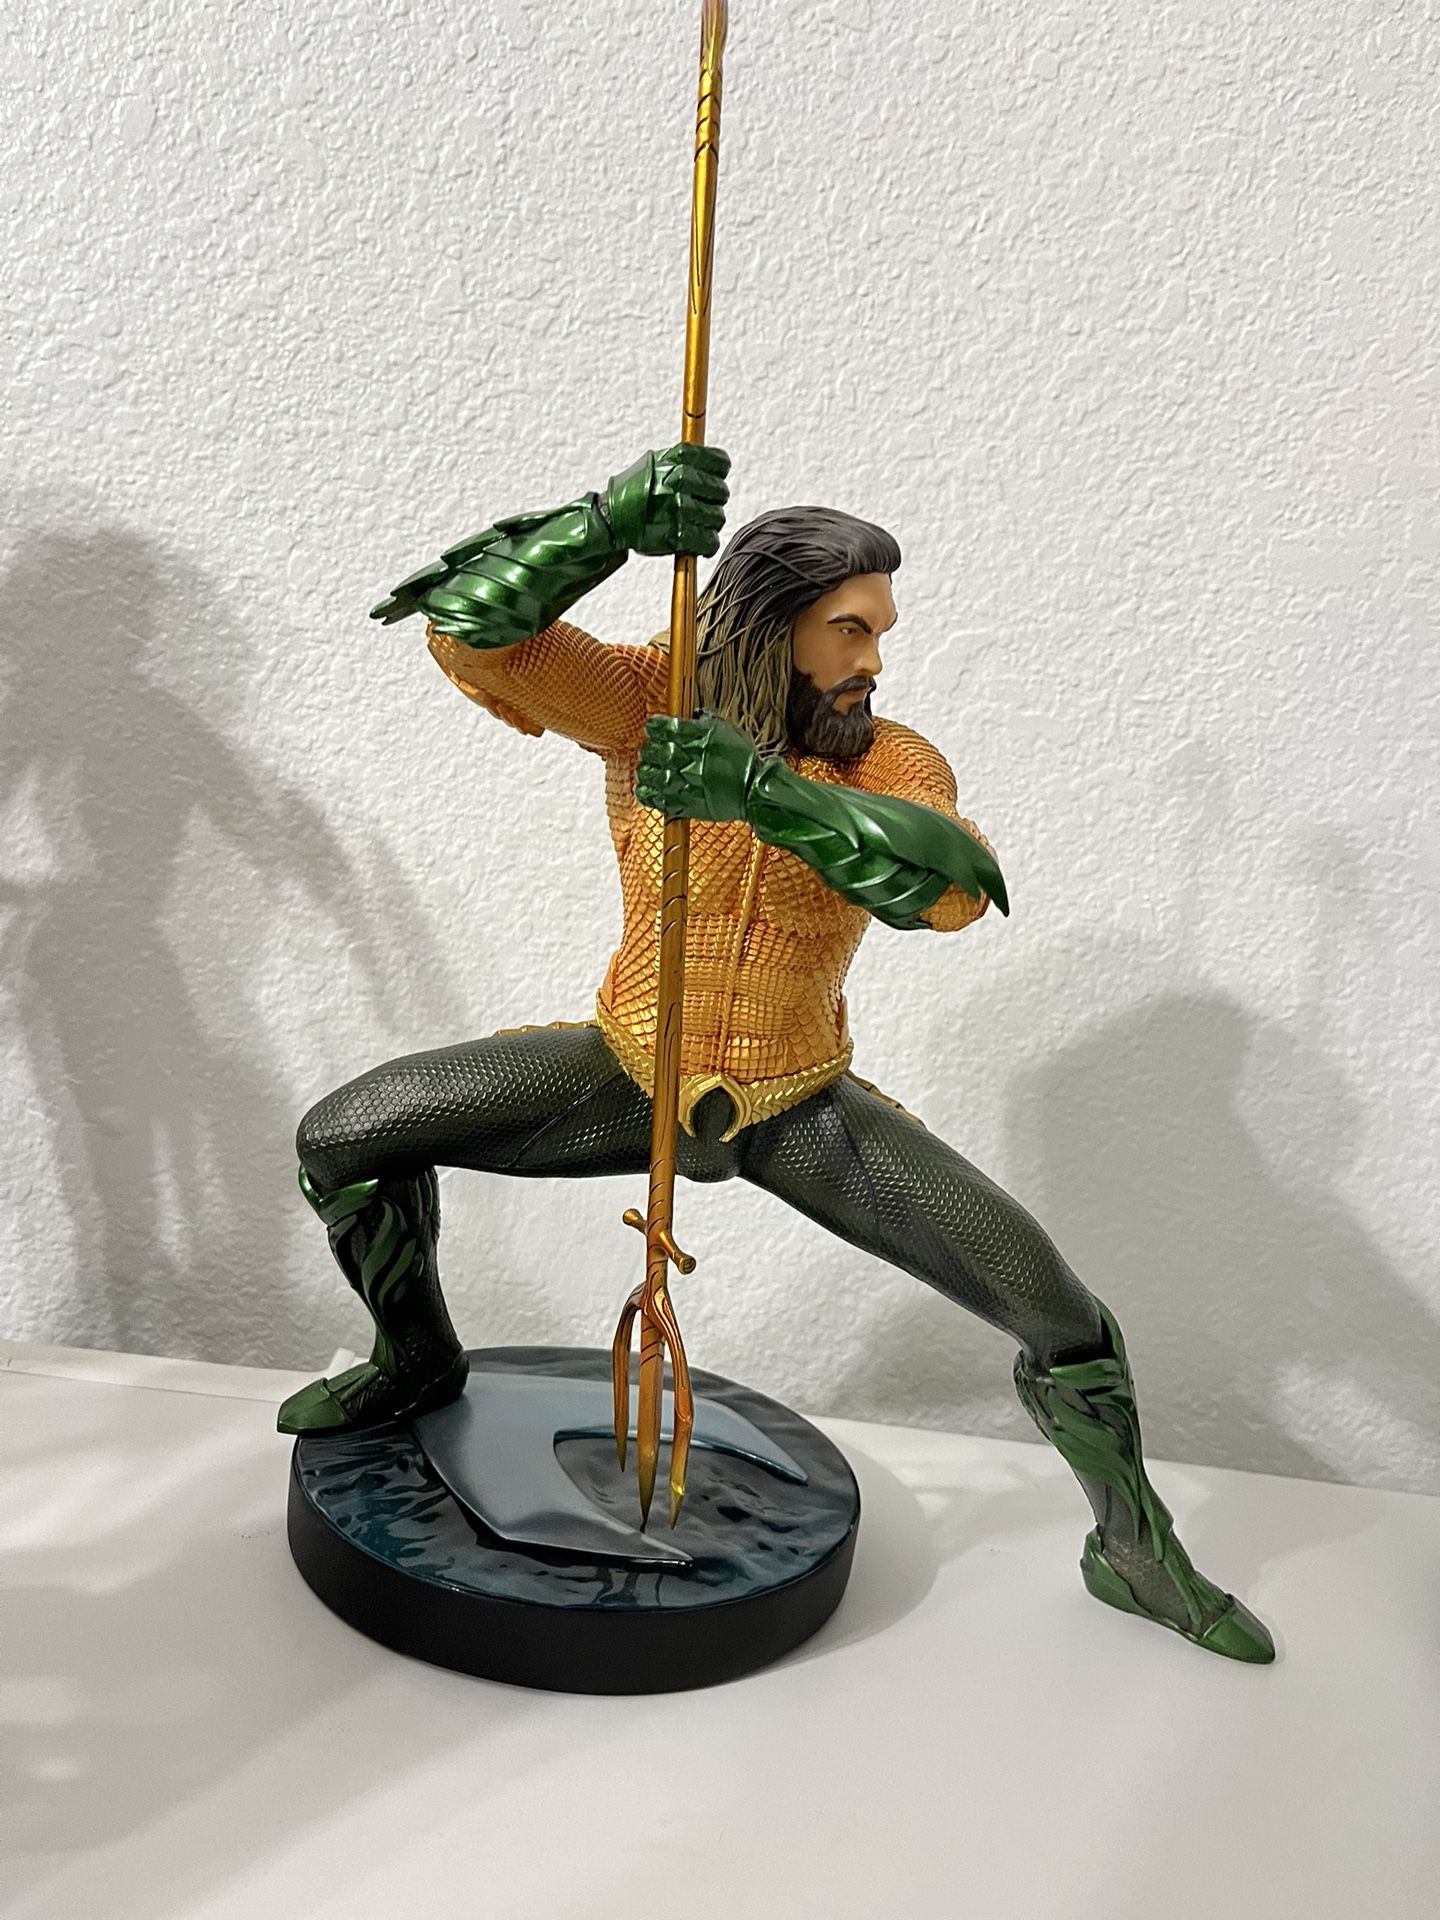 DC Collectibles Aquaman Statue 1/6th Resin Statue